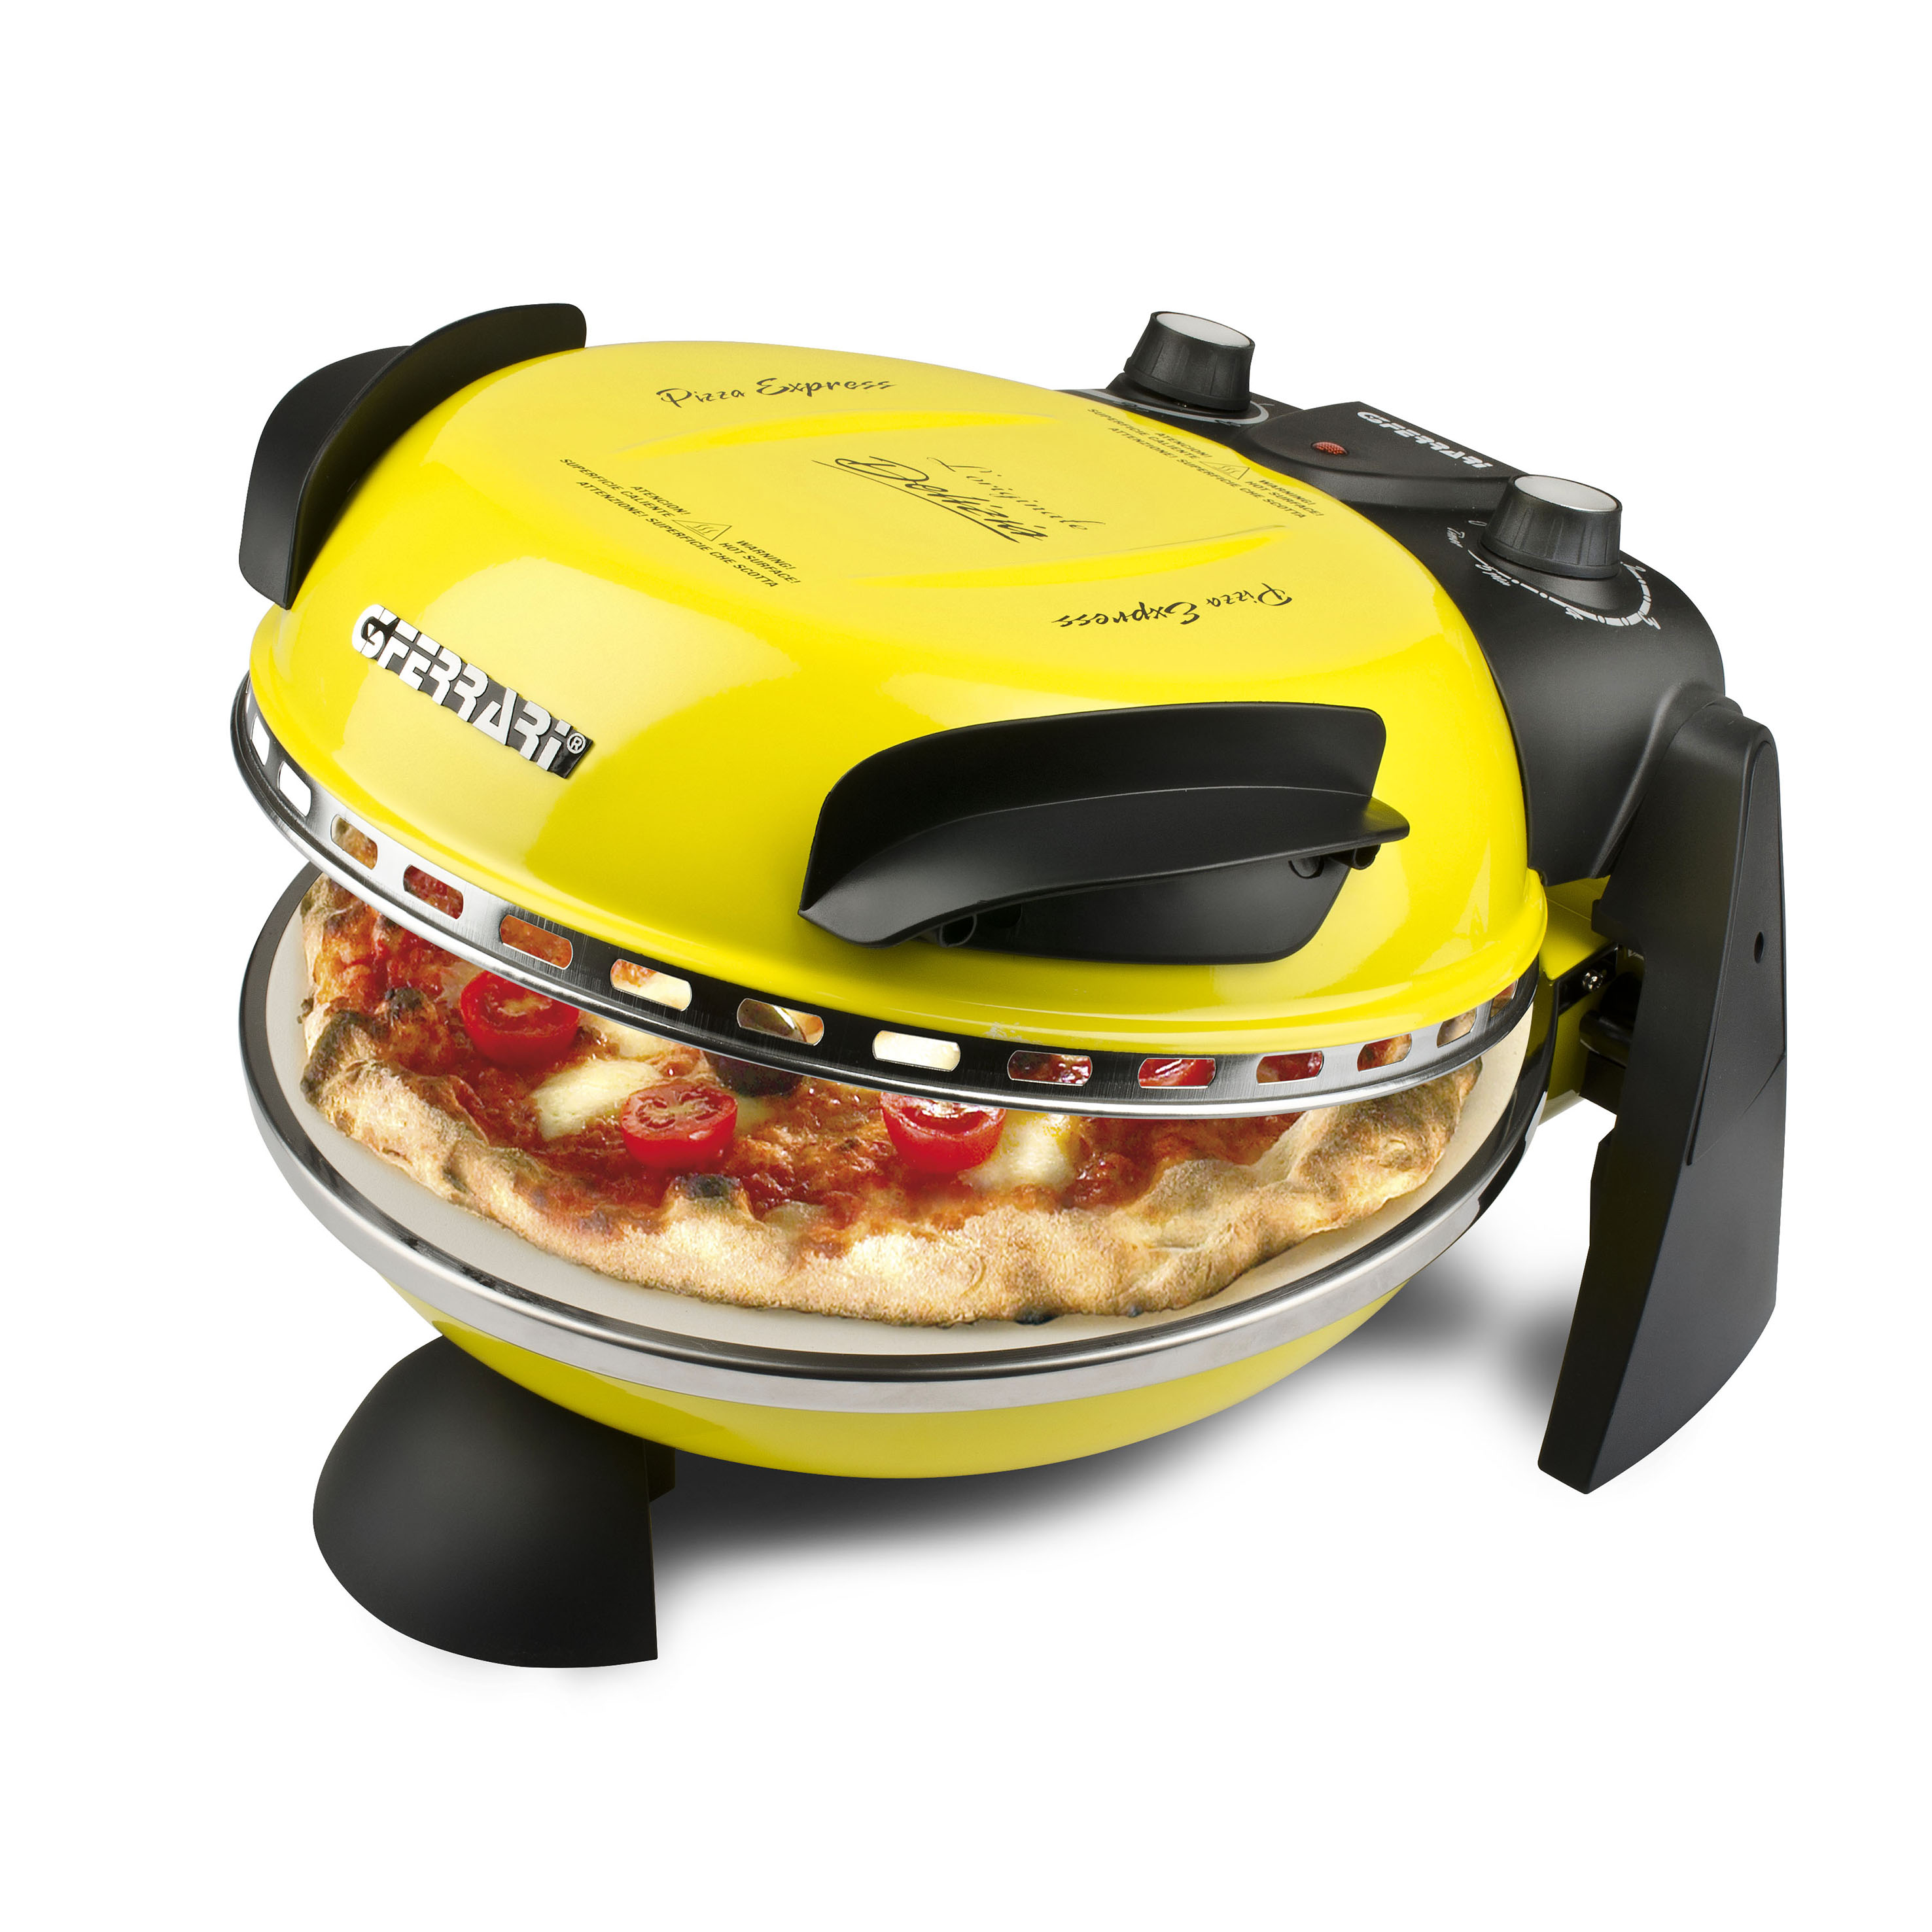 G1000605, Delizia, pizza oven, 1200W, up to 400C, yellow